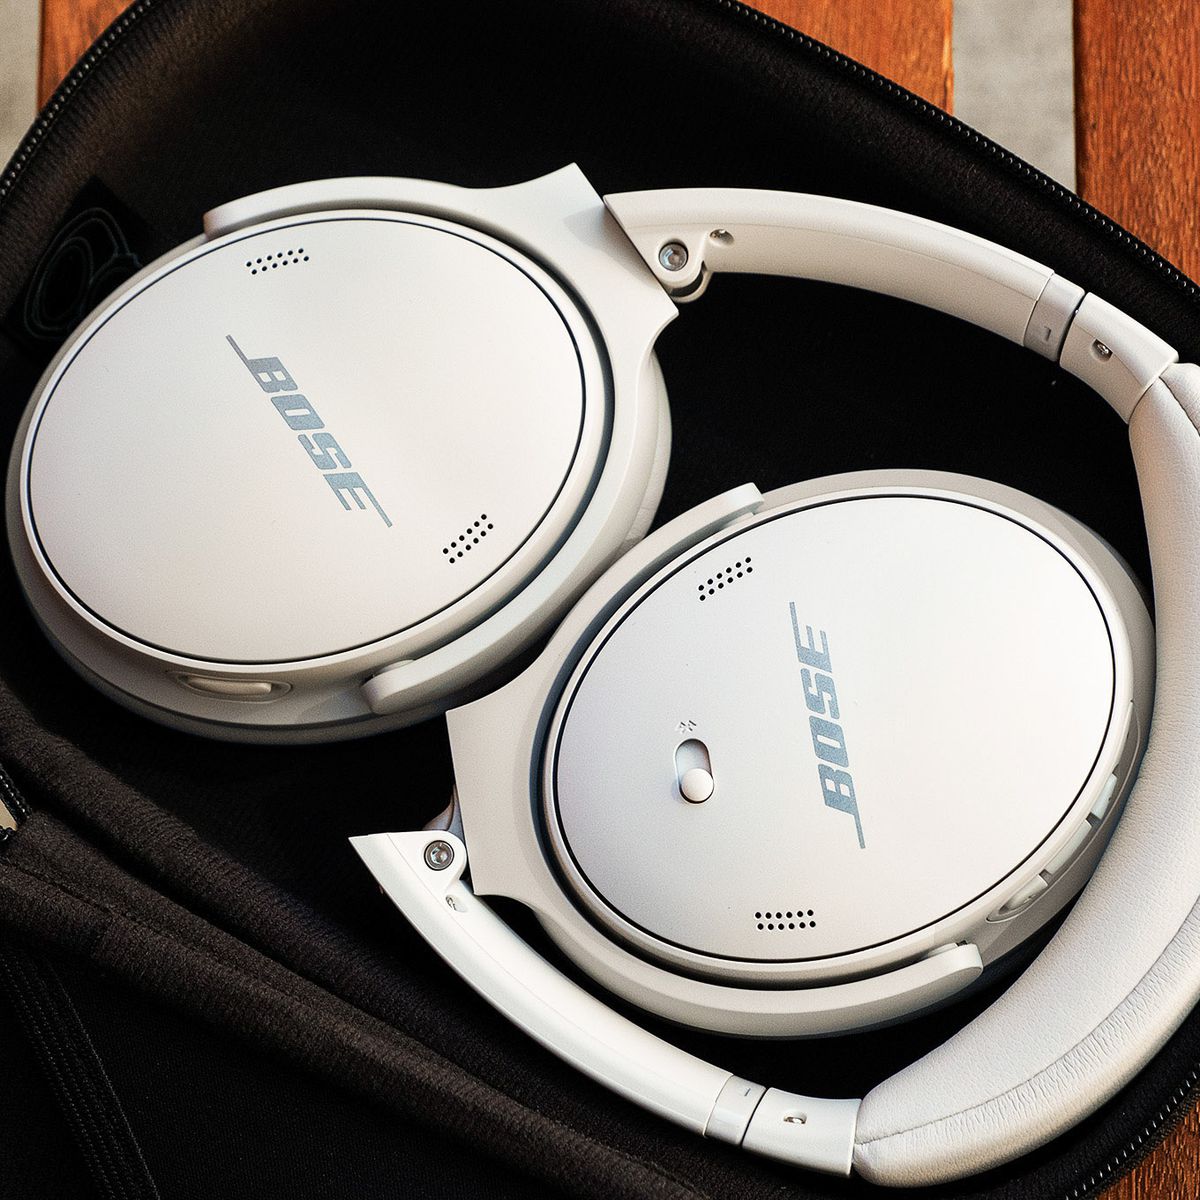 Save on bose noise canceling headphones and earbuds at best buy